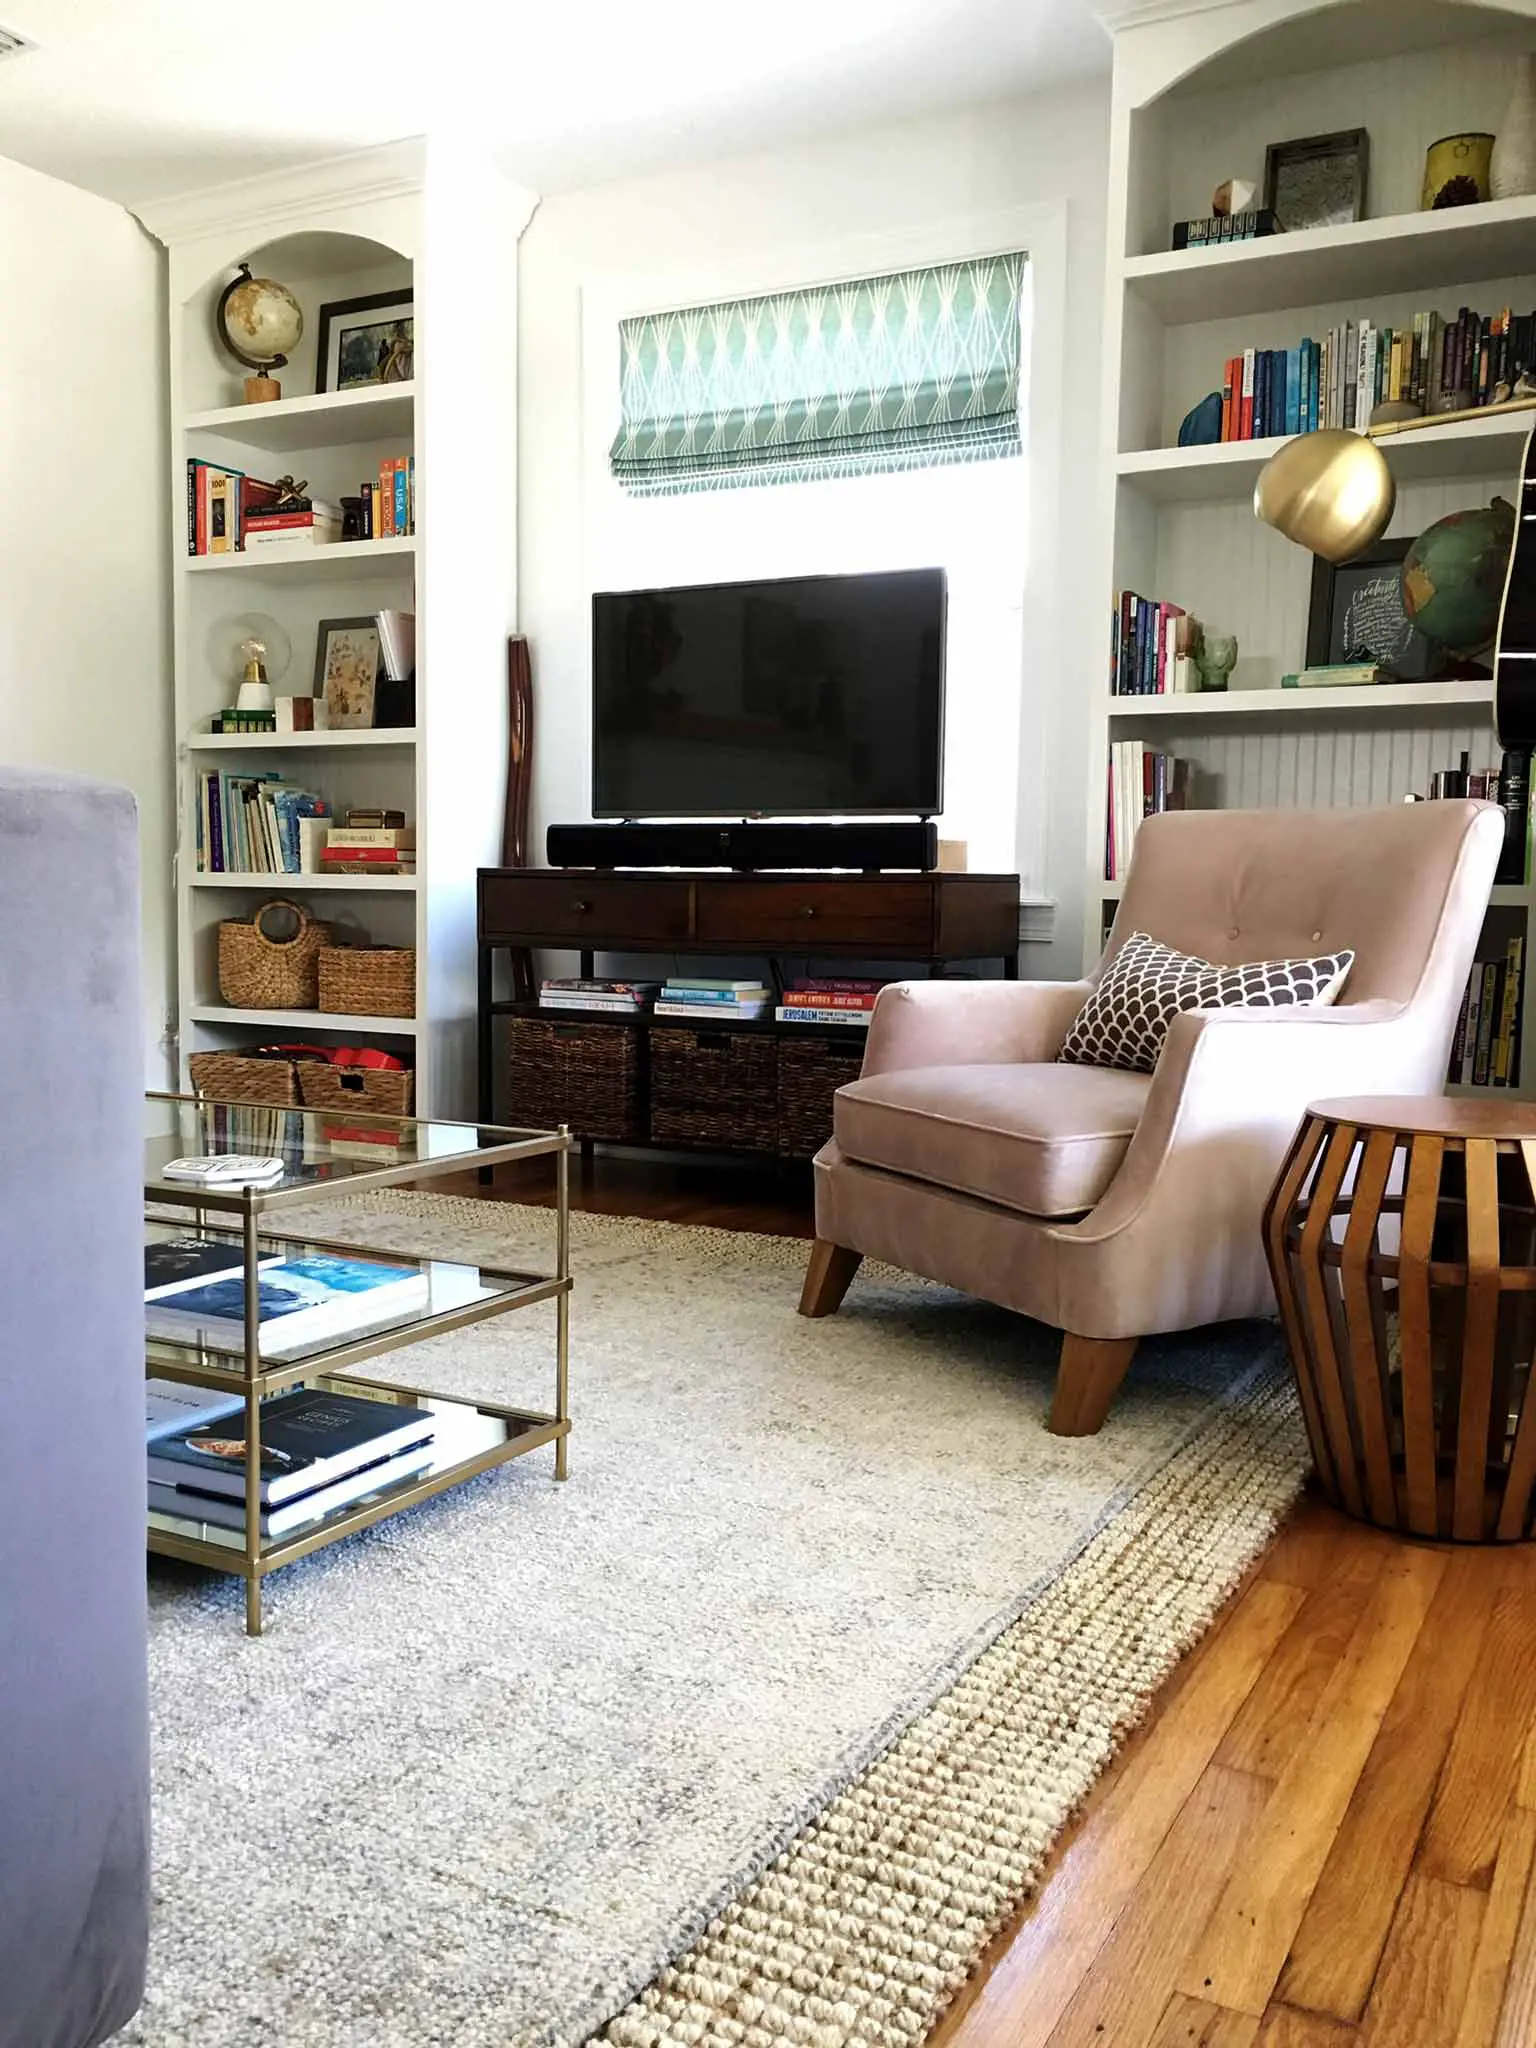 Living room after the refresh | layered rugs, glass coffee table, blush velvet accent chair, gold accents, built-in bookcases | That Homebird Life Blog